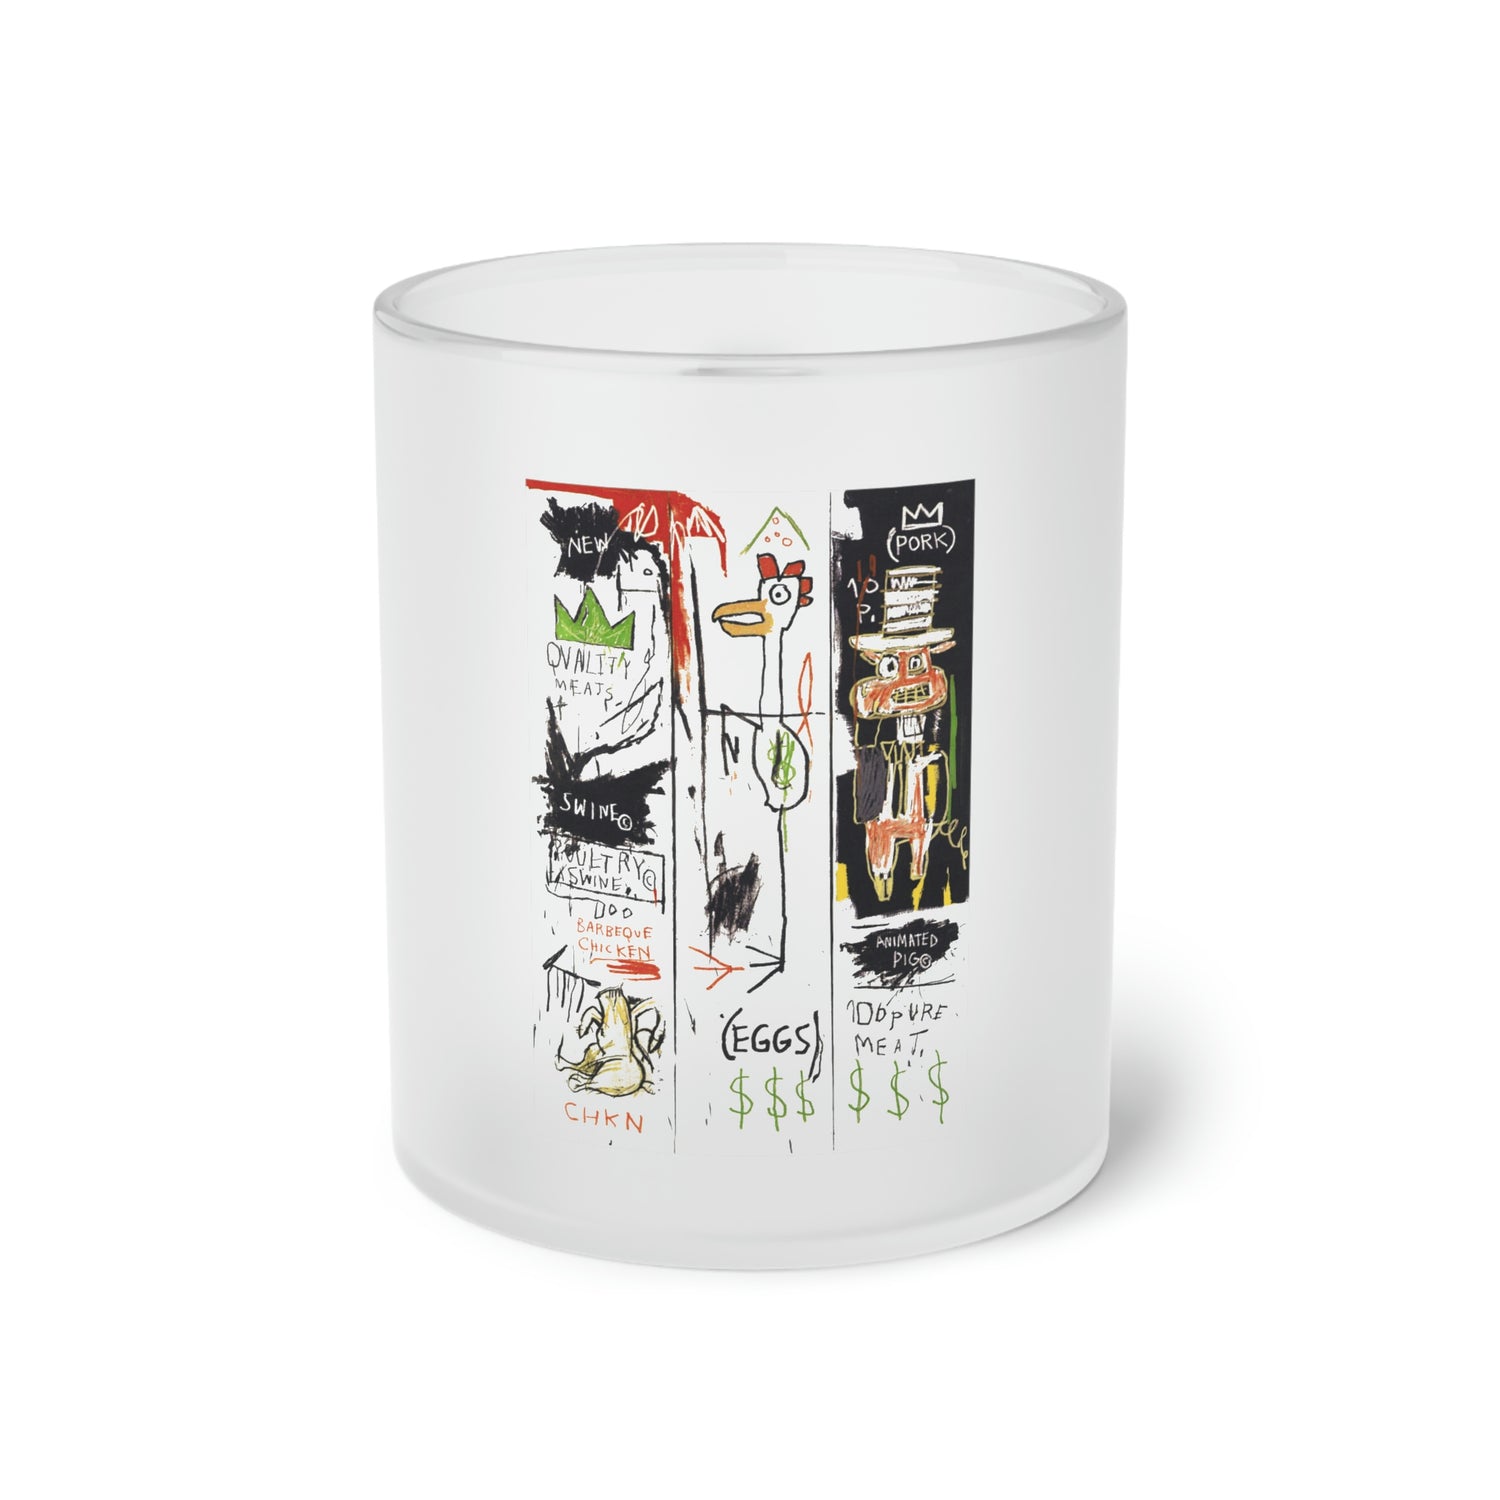 Jean-Michel Basquiat "Quality Meats for the Public" Frosted Glass Mug